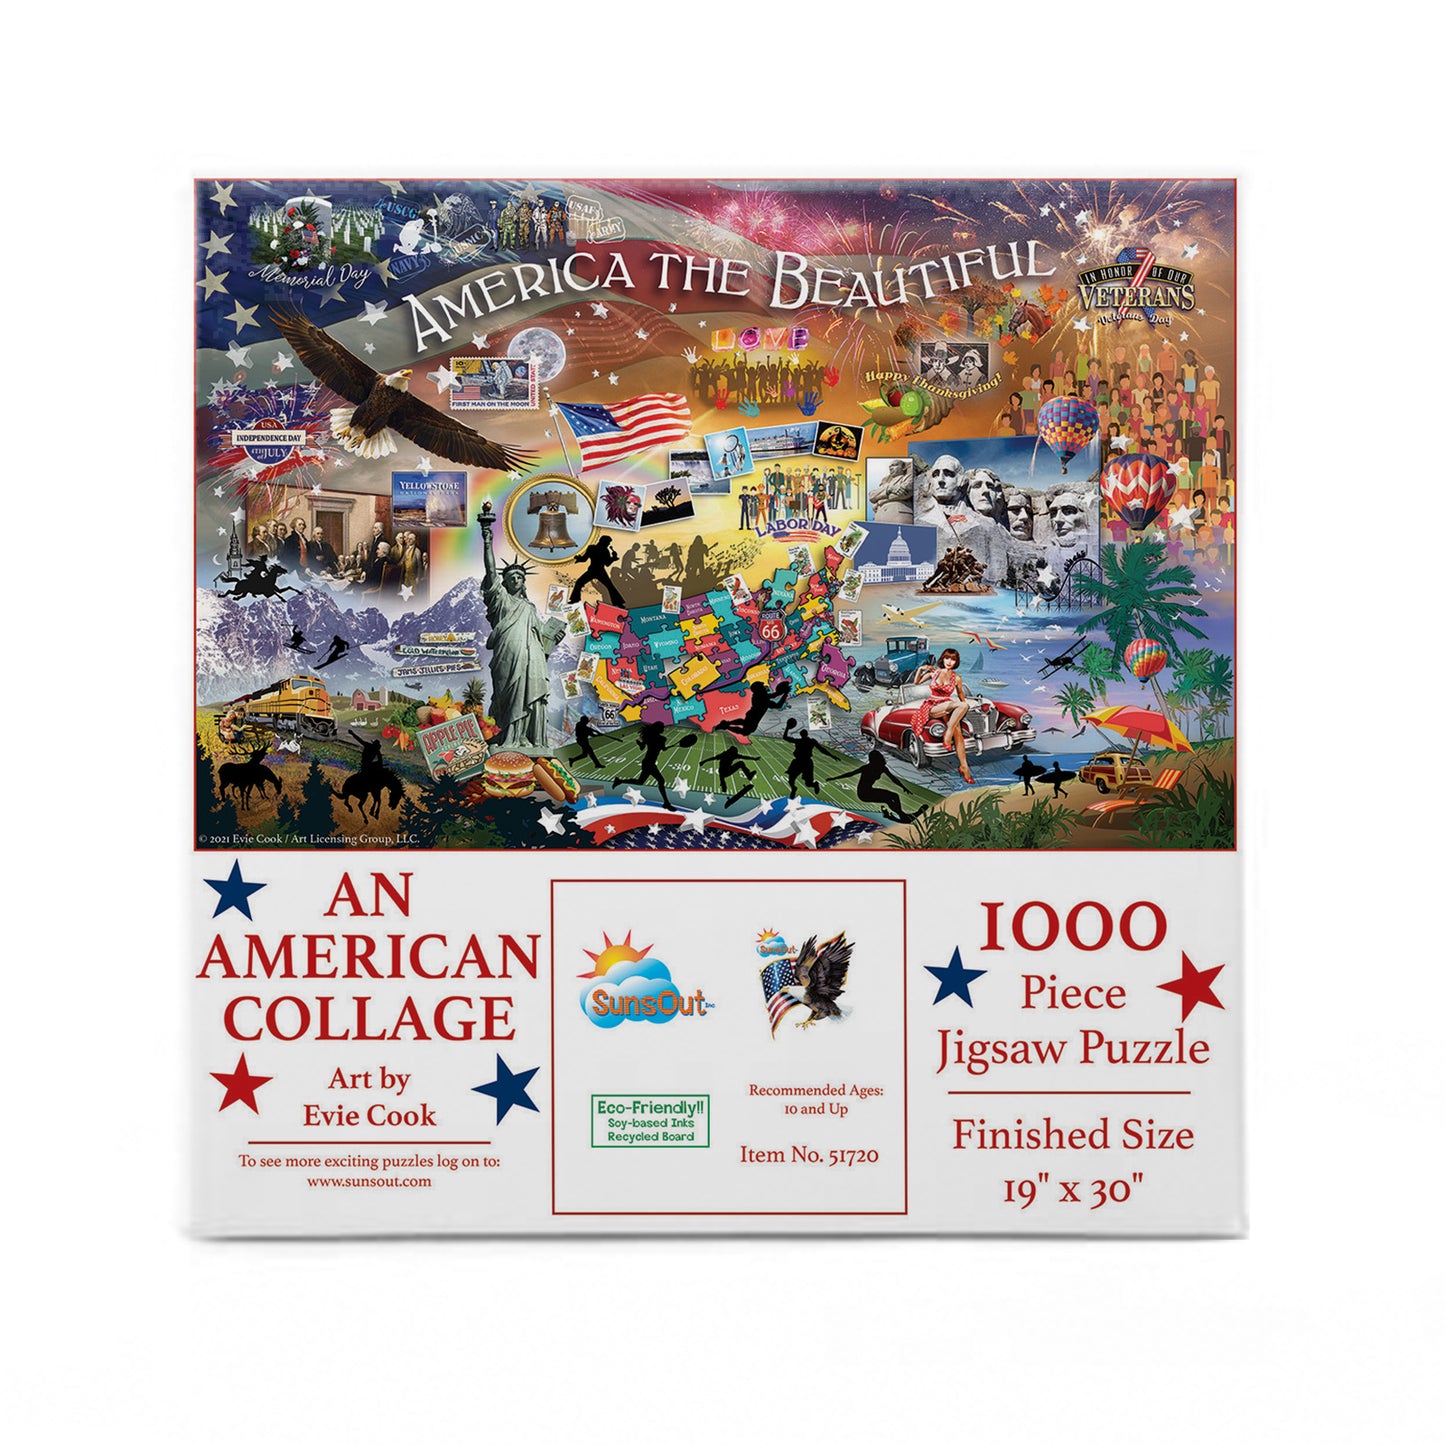 An American Collage - 1000 Piece Jigsaw Puzzle